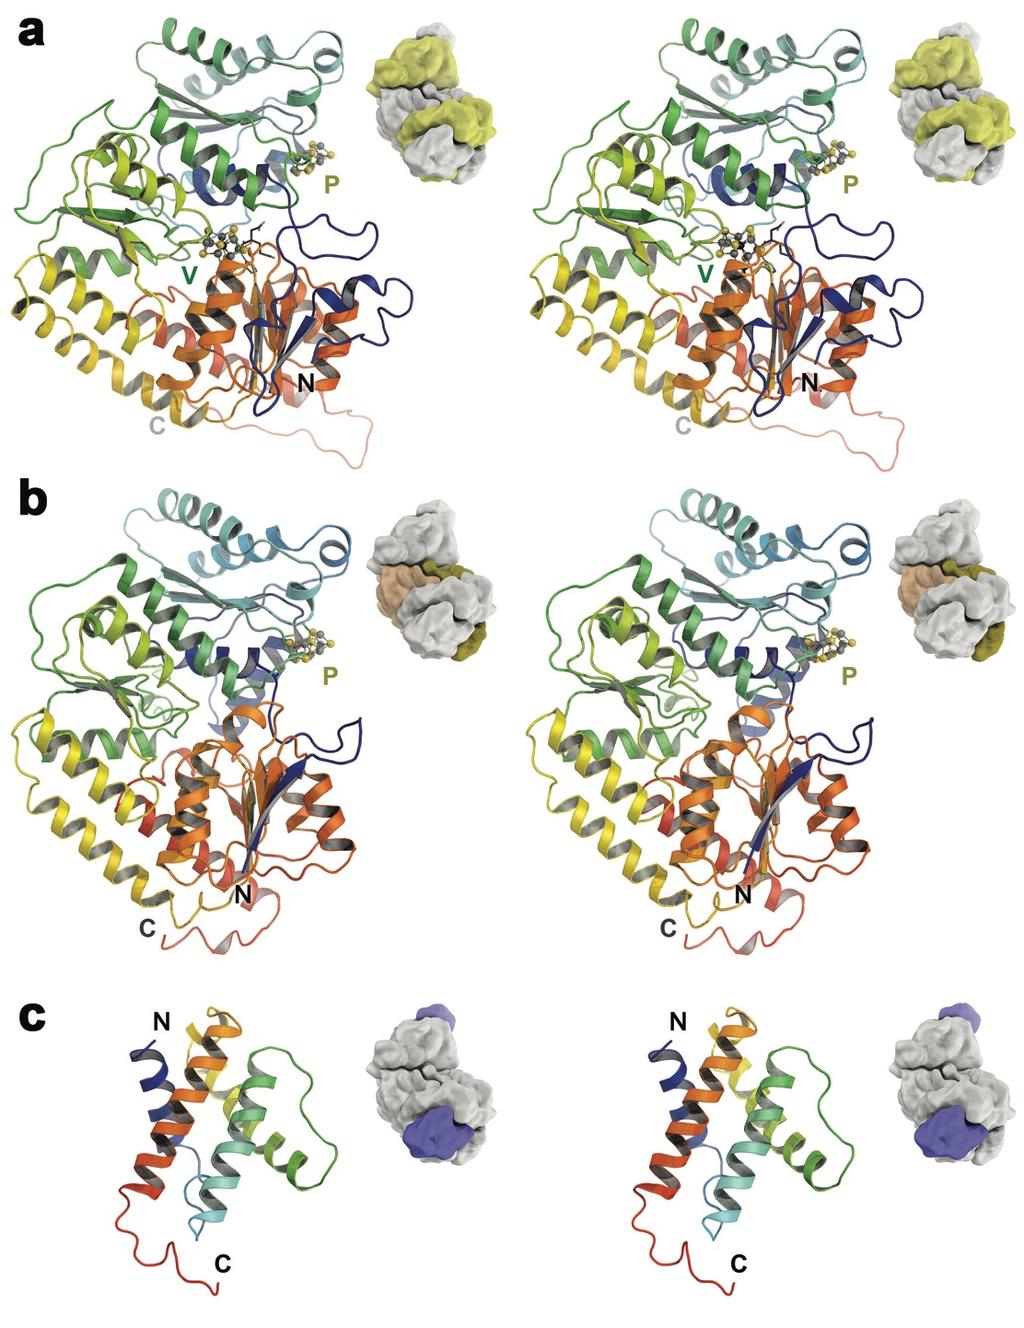 SUPPLEMENTARY RESULTS Supplementary Figure 1: Subunit structure of A. vinelandii VFe protein.